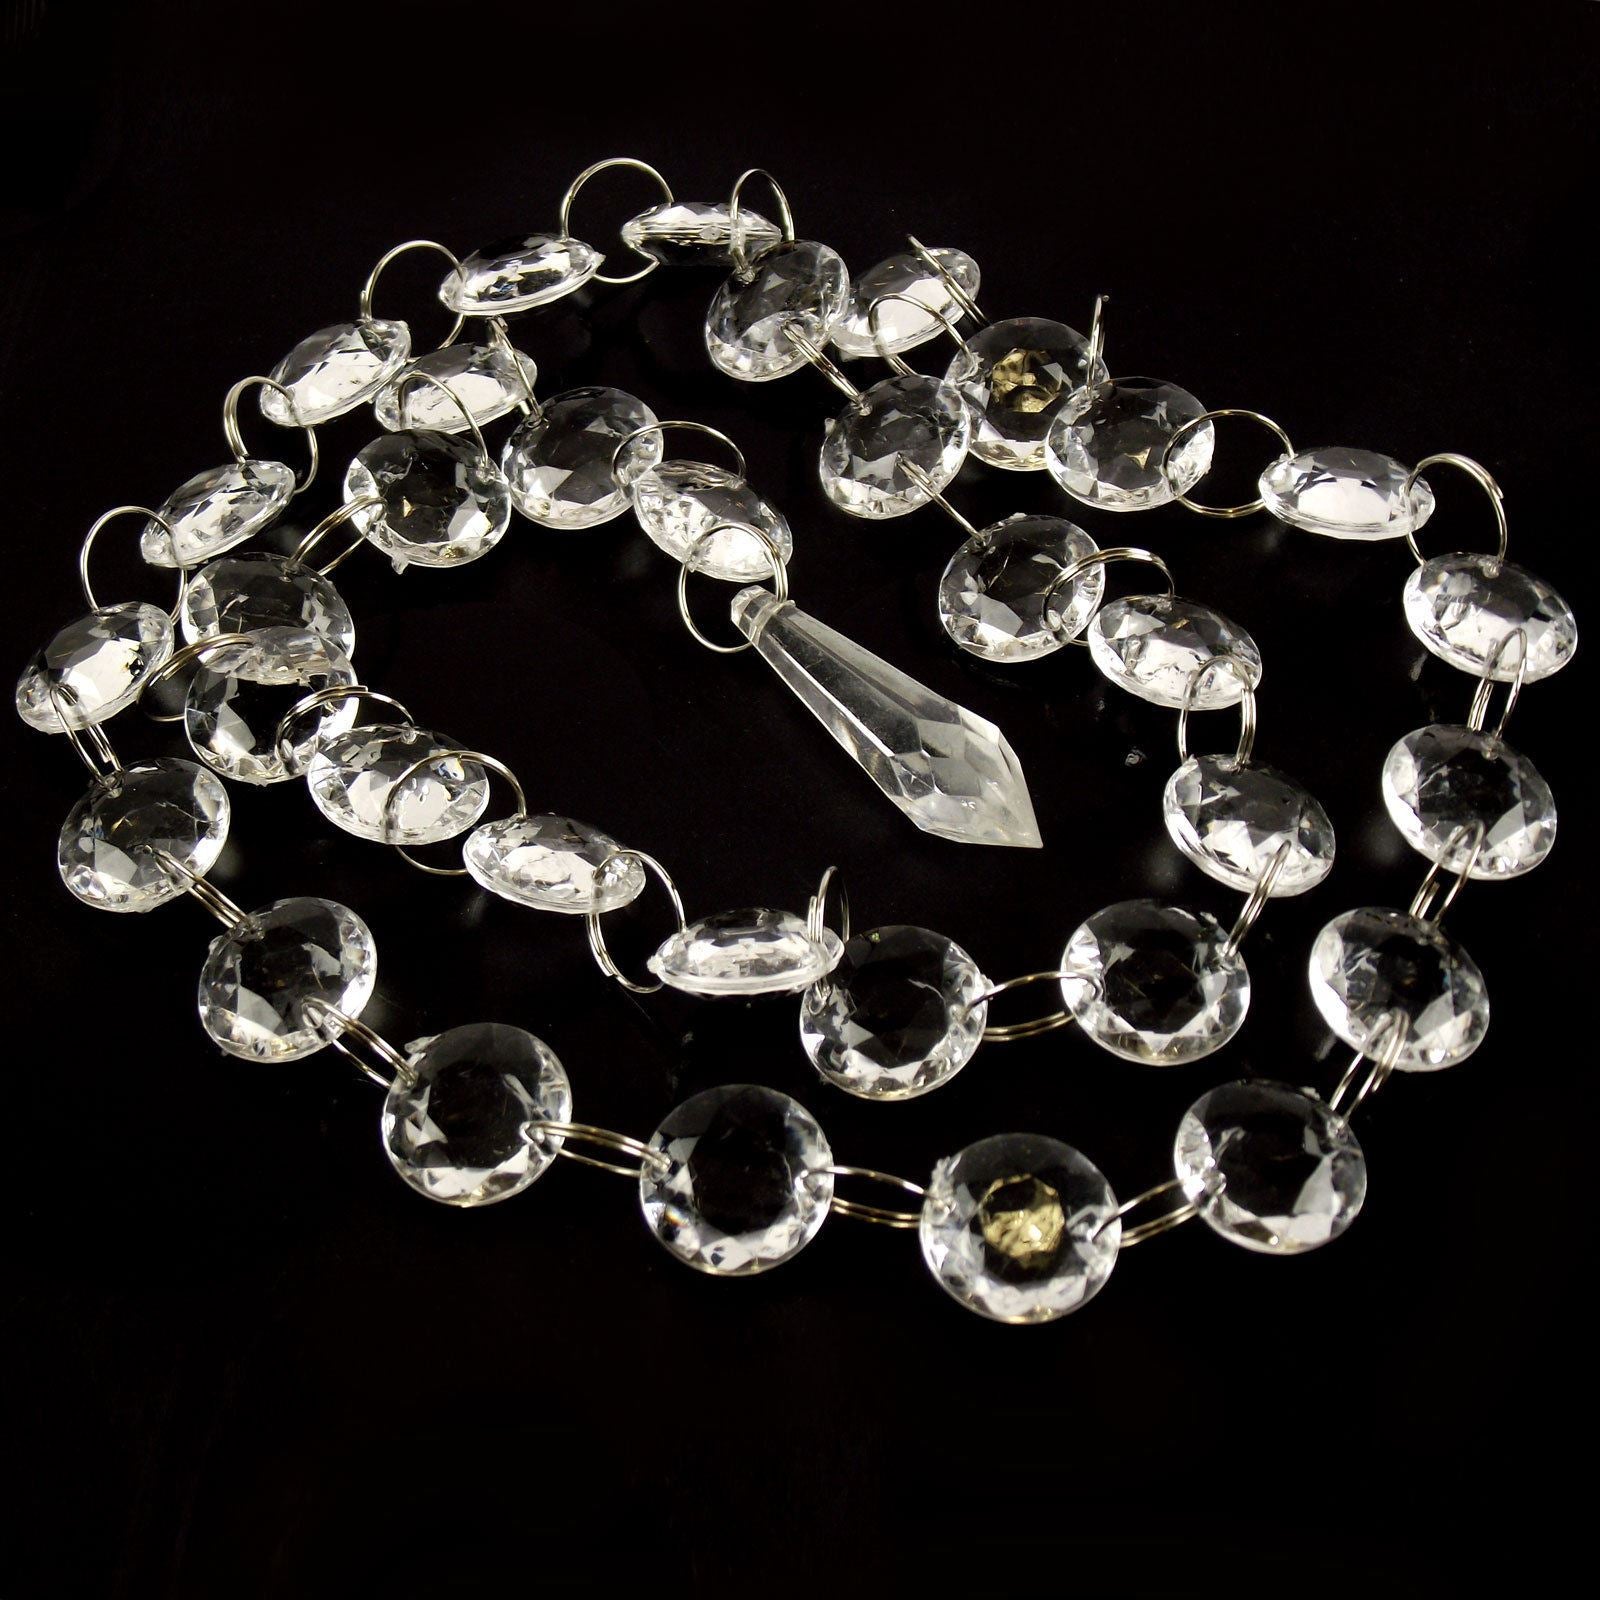 High Quality Acrylic Crystal Garland - Premium with Droplet! Chain